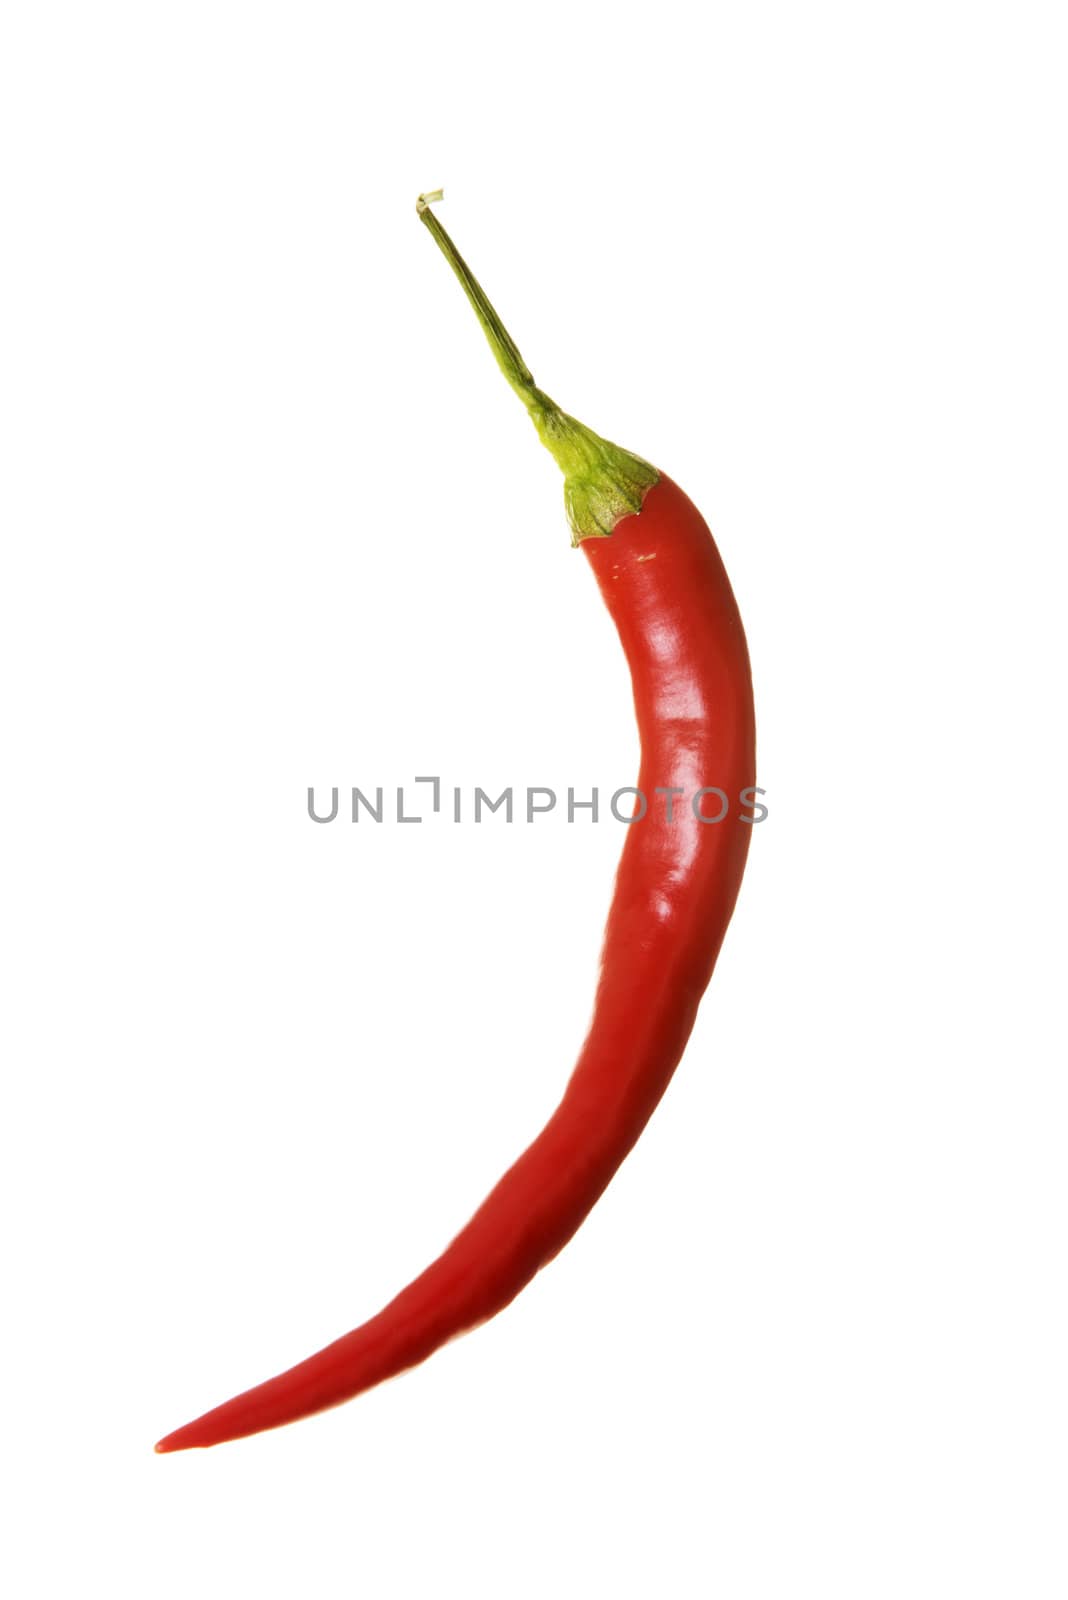 Red hot chilie peppers, isolated on white